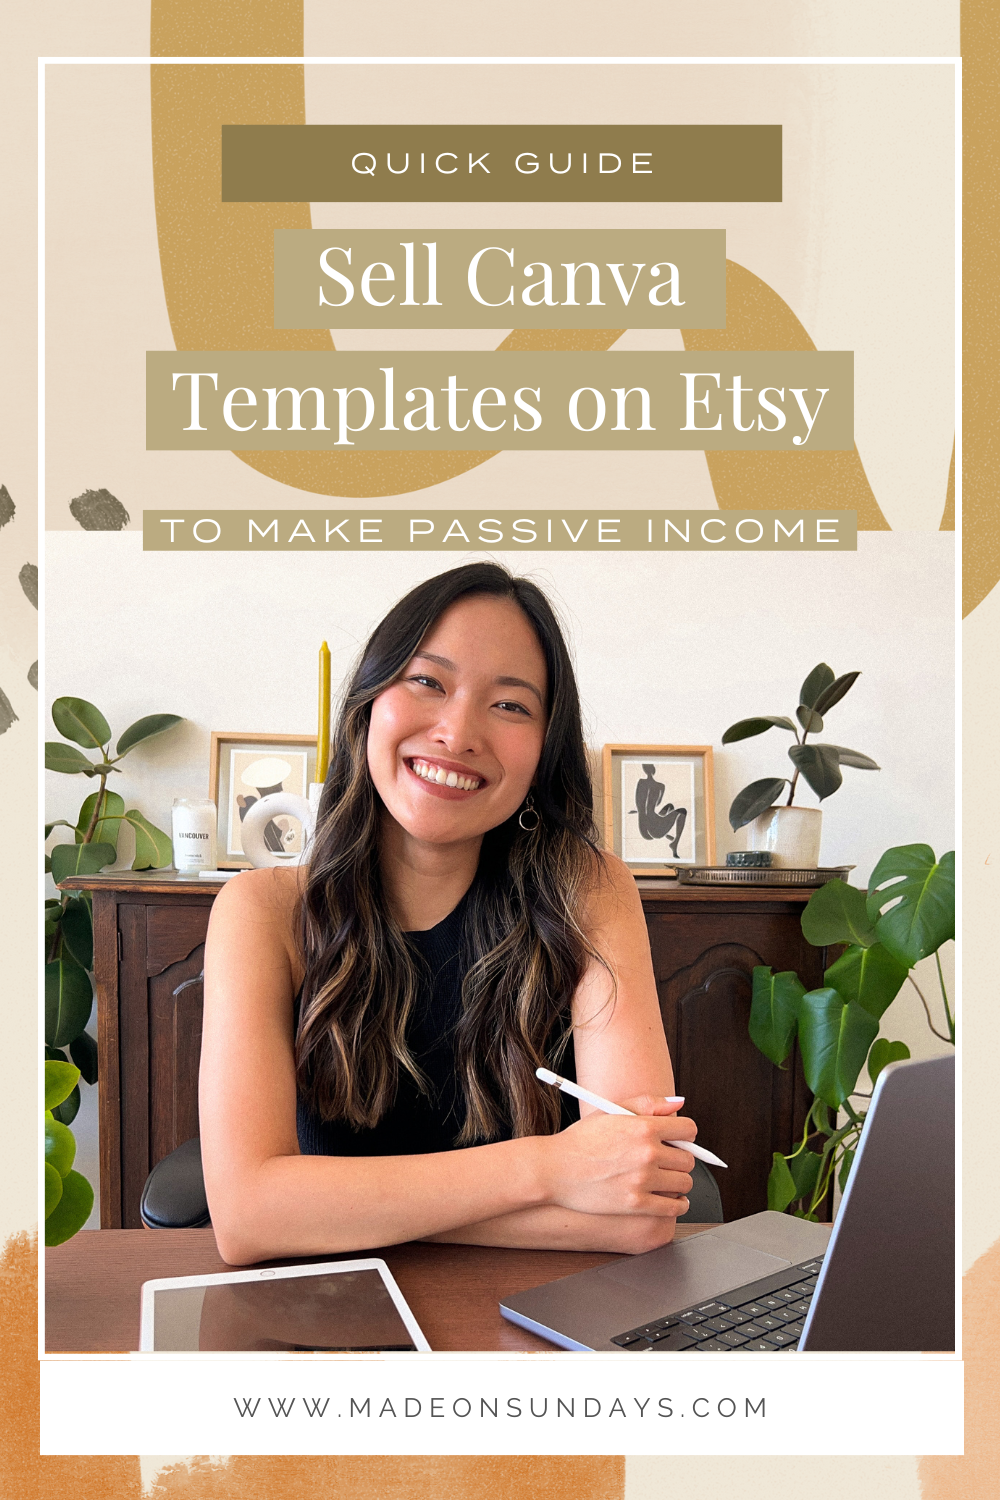 Sell Canva Templates on Etsy to Make Passive